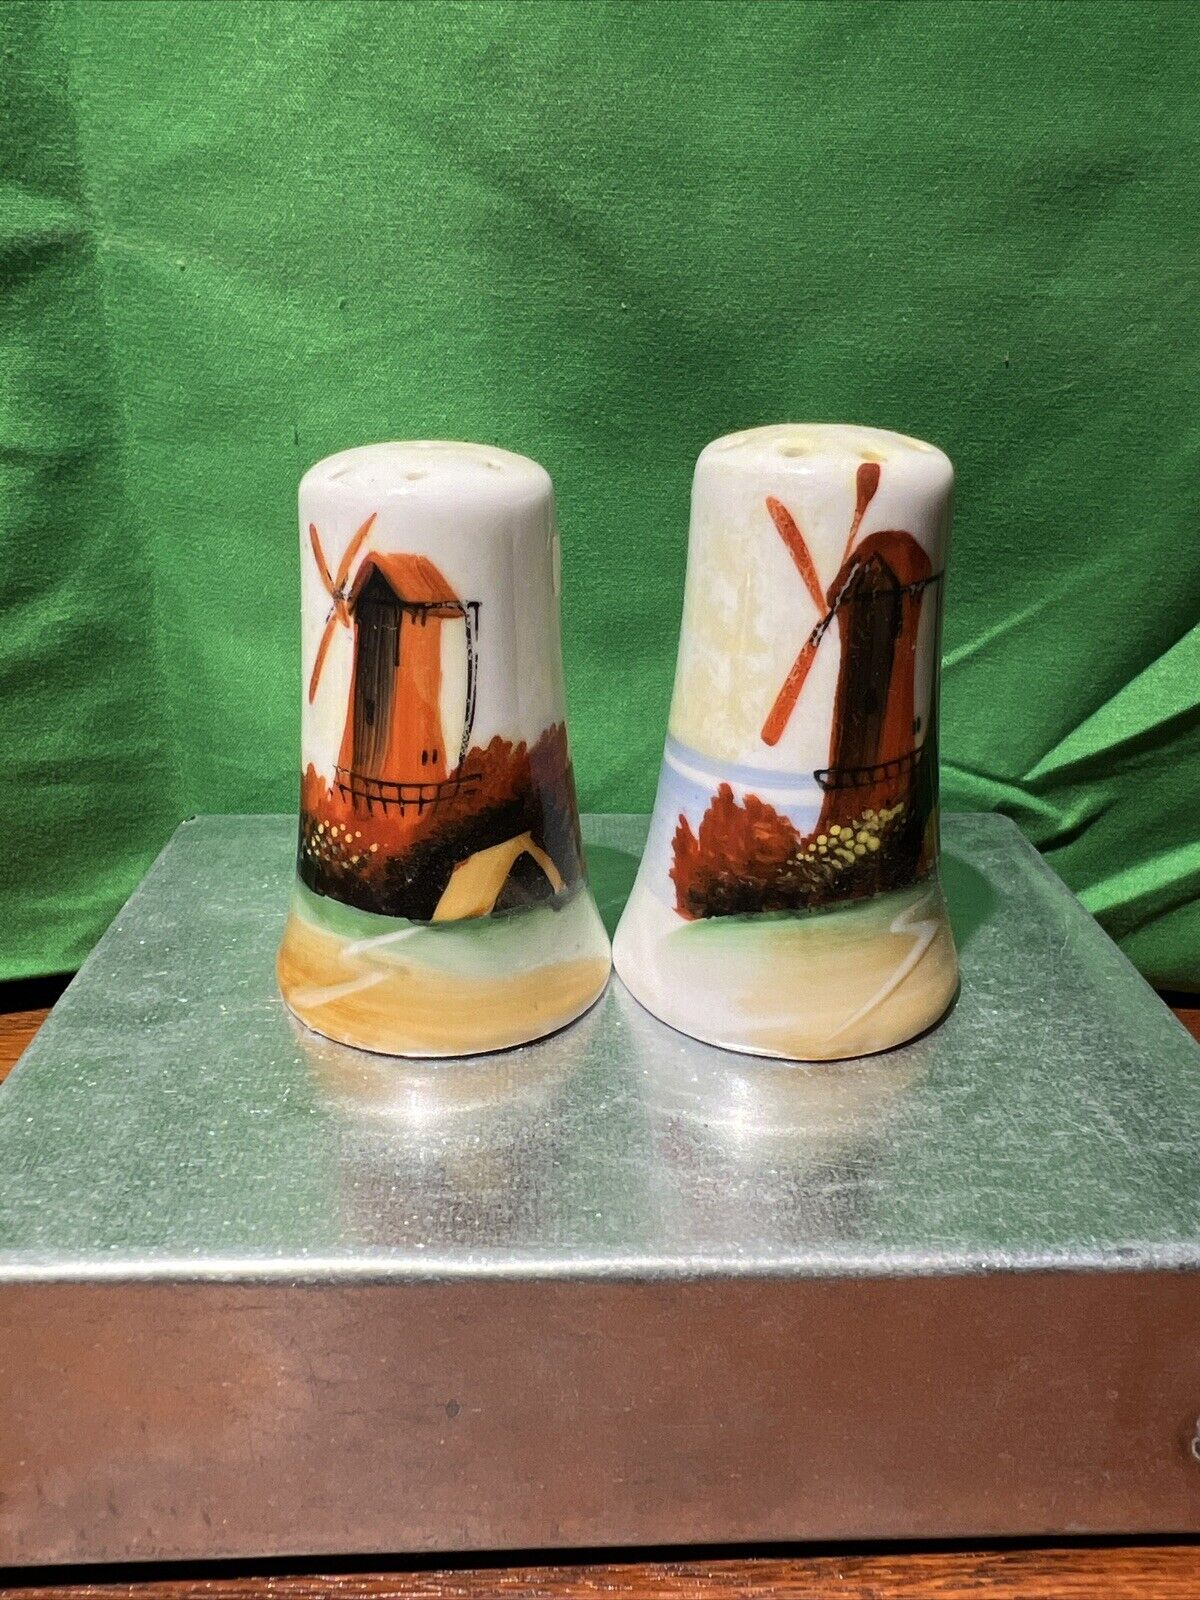 Vintage Lusterware Salt & Pepper Shakers with Dutch Windmill Theme~Made in Japan